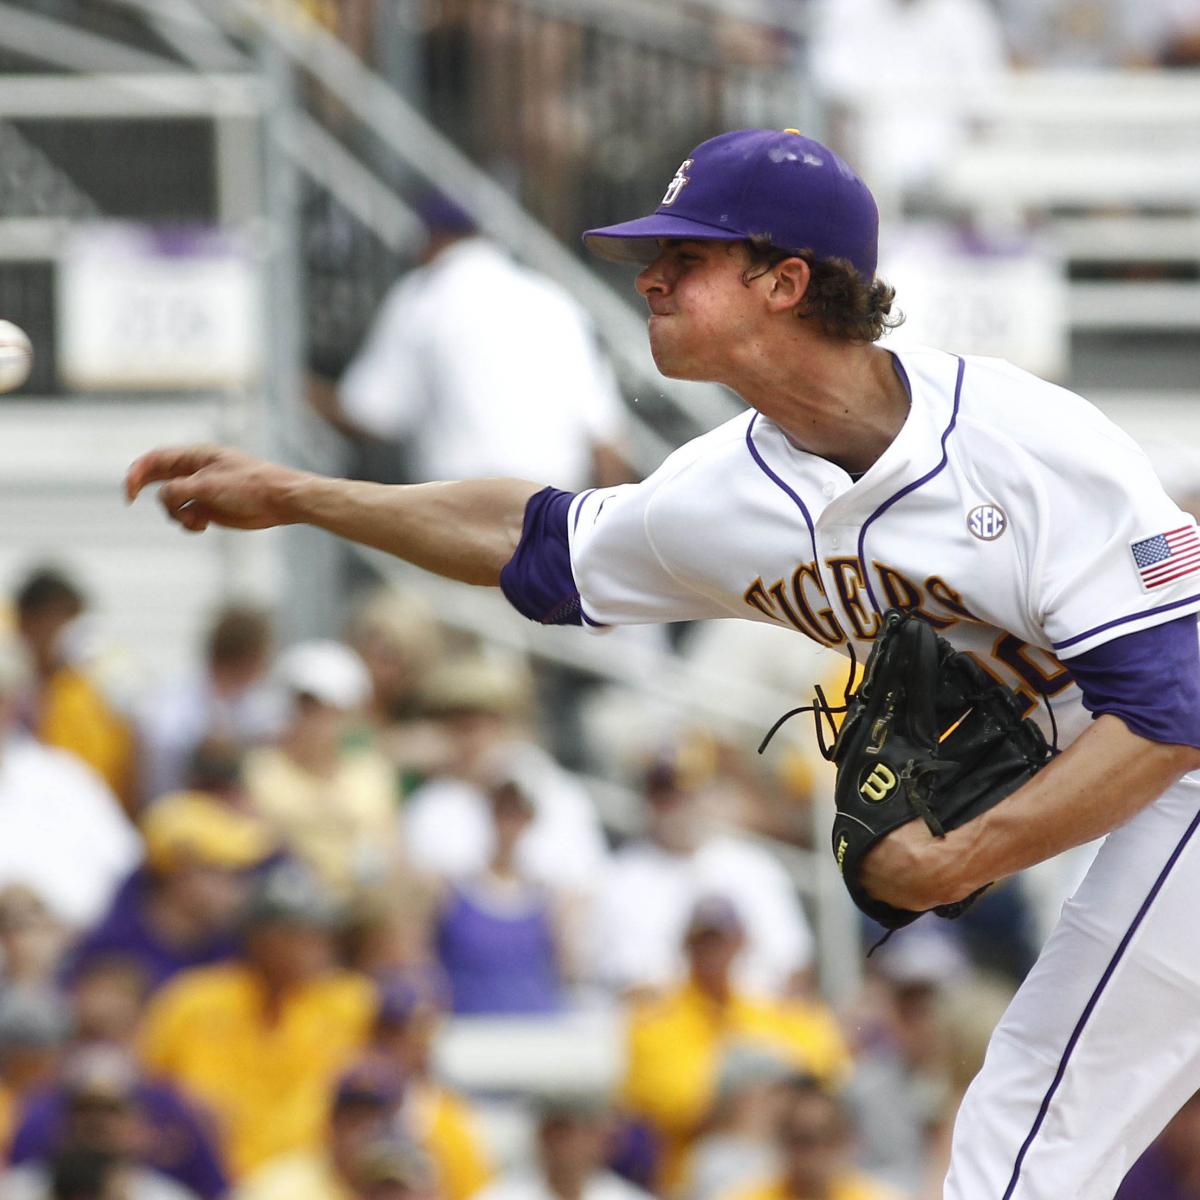 NCAA Baseball Super Regionals Day 1 Results, Highlights and Analysis